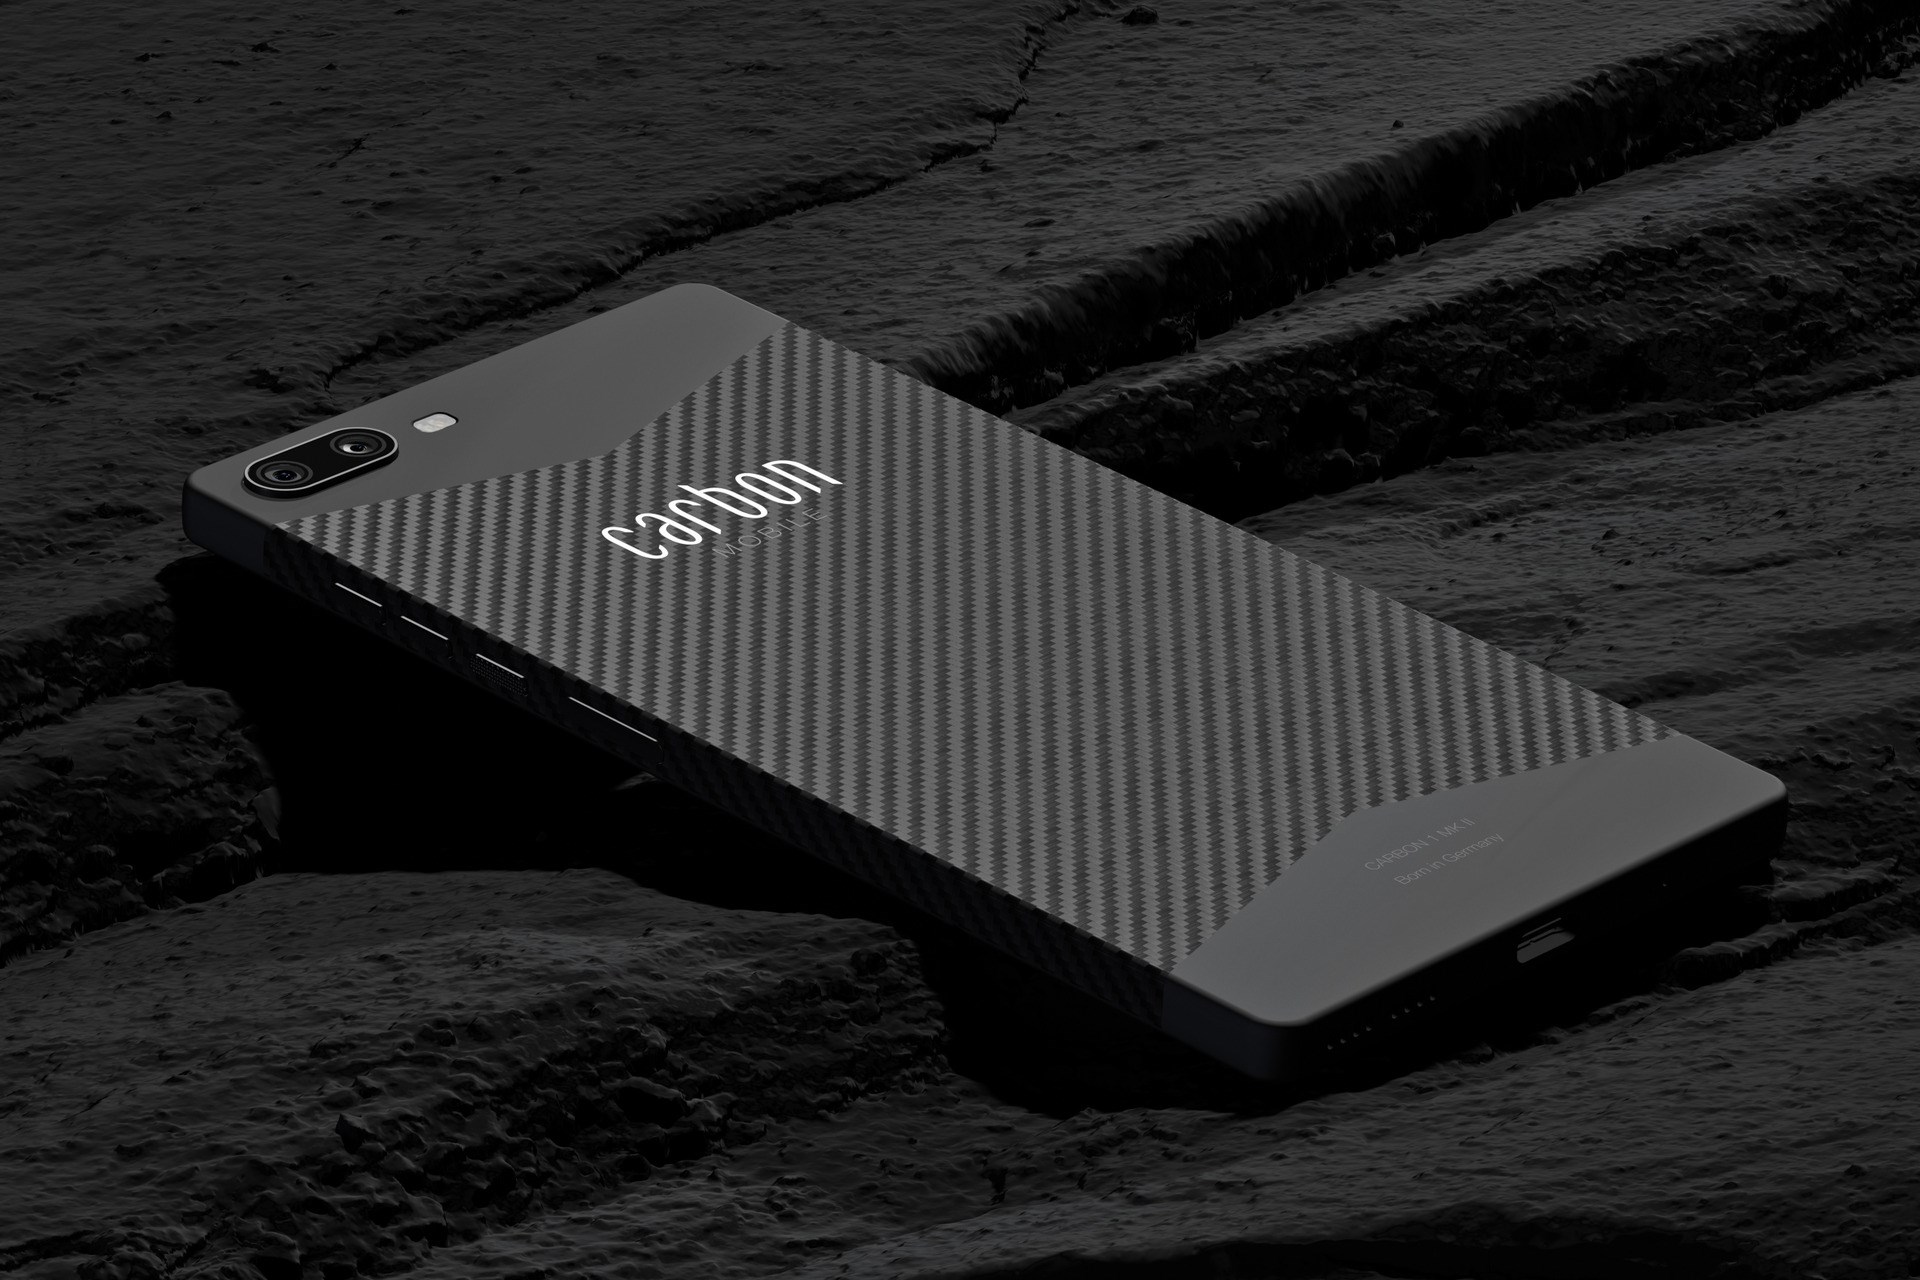 smartphone with all-carbon-fiber housing, carbon fibers, Tepex